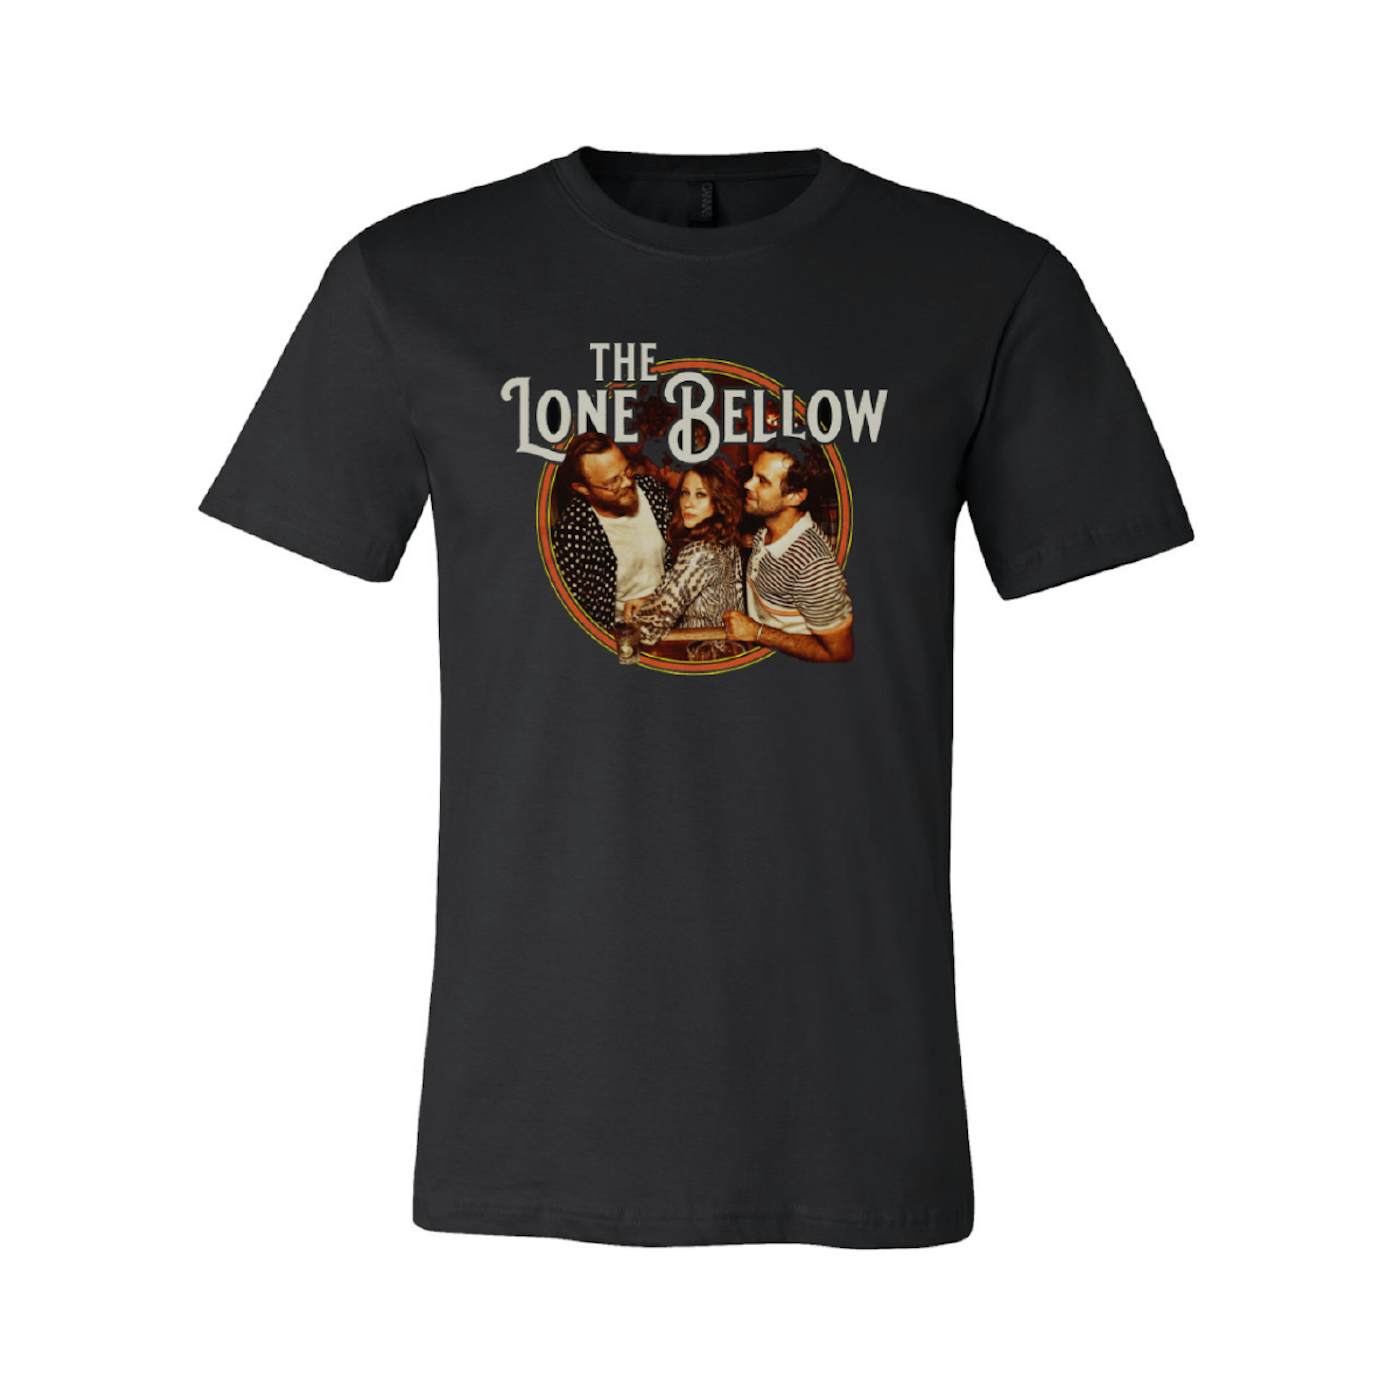 The Lone Bellow Photo Tee